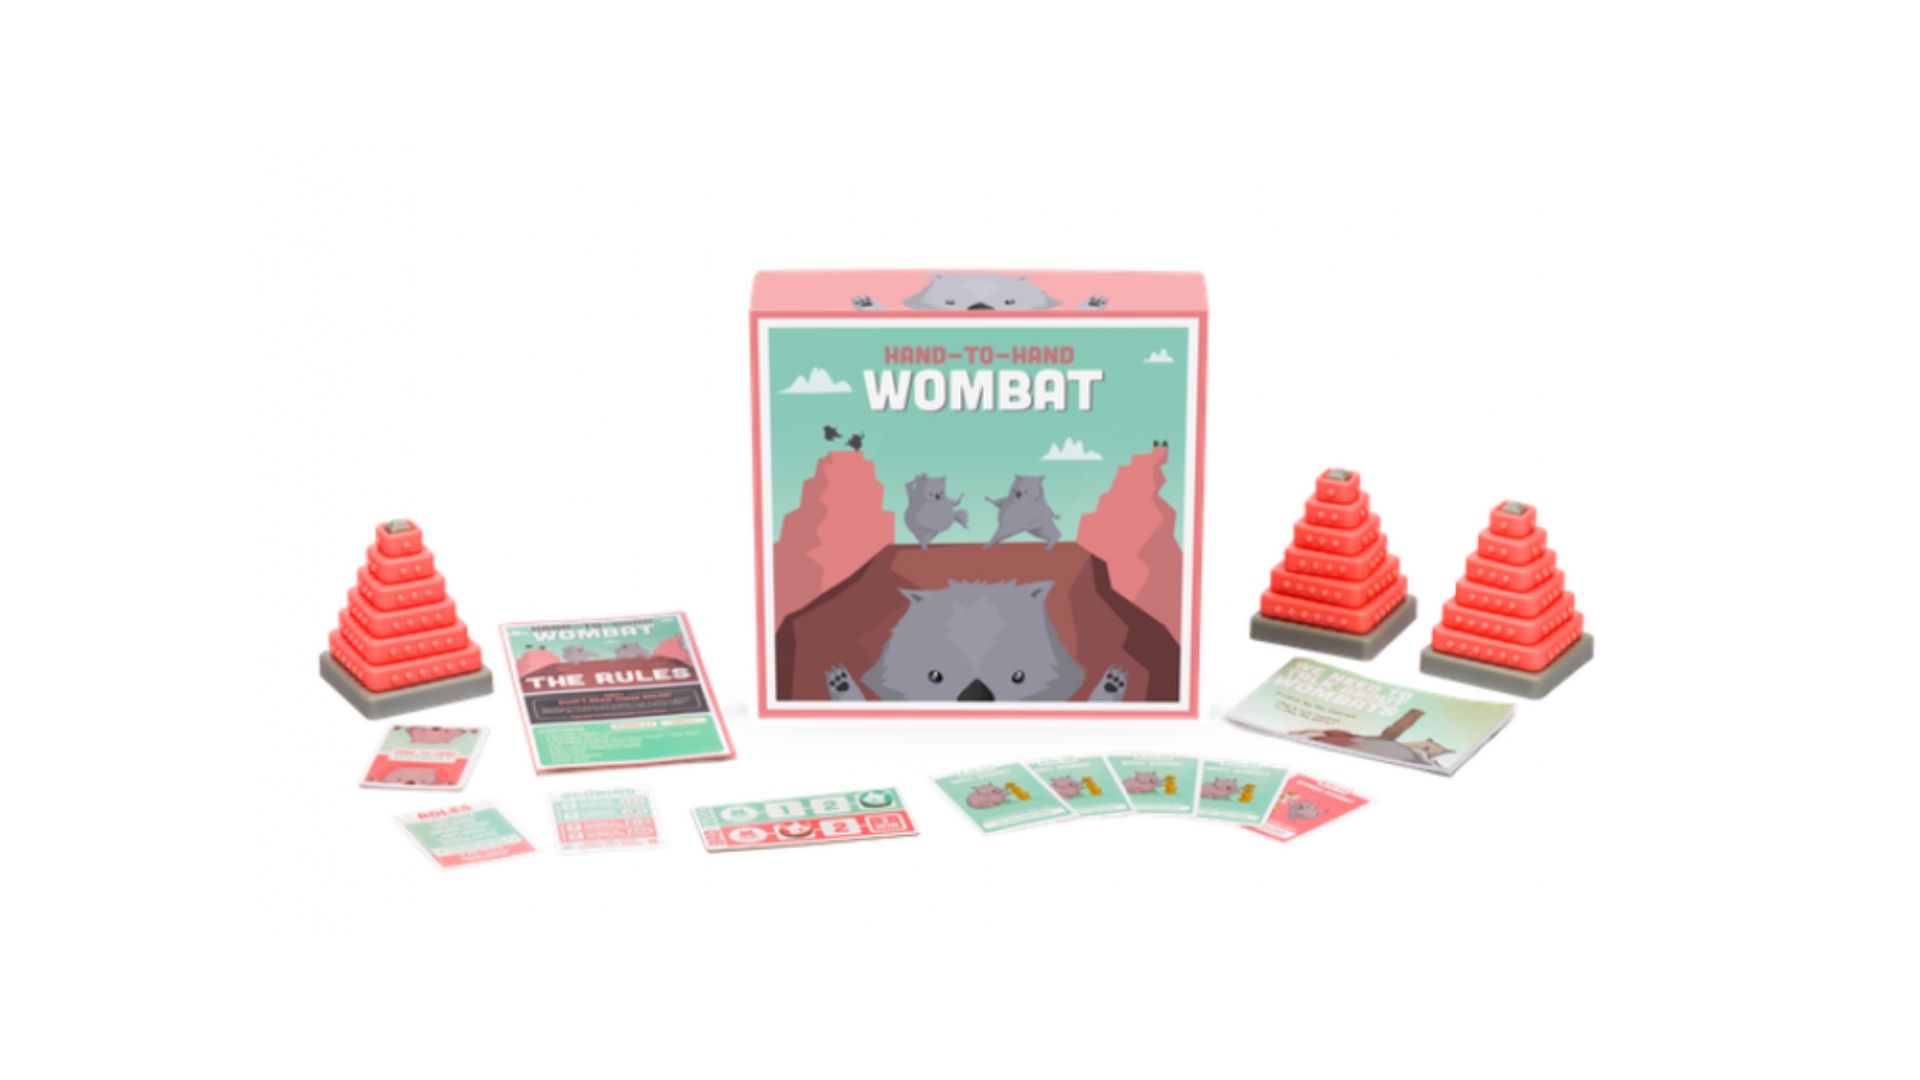 Two-player card games - Hand to Hand Wombat box